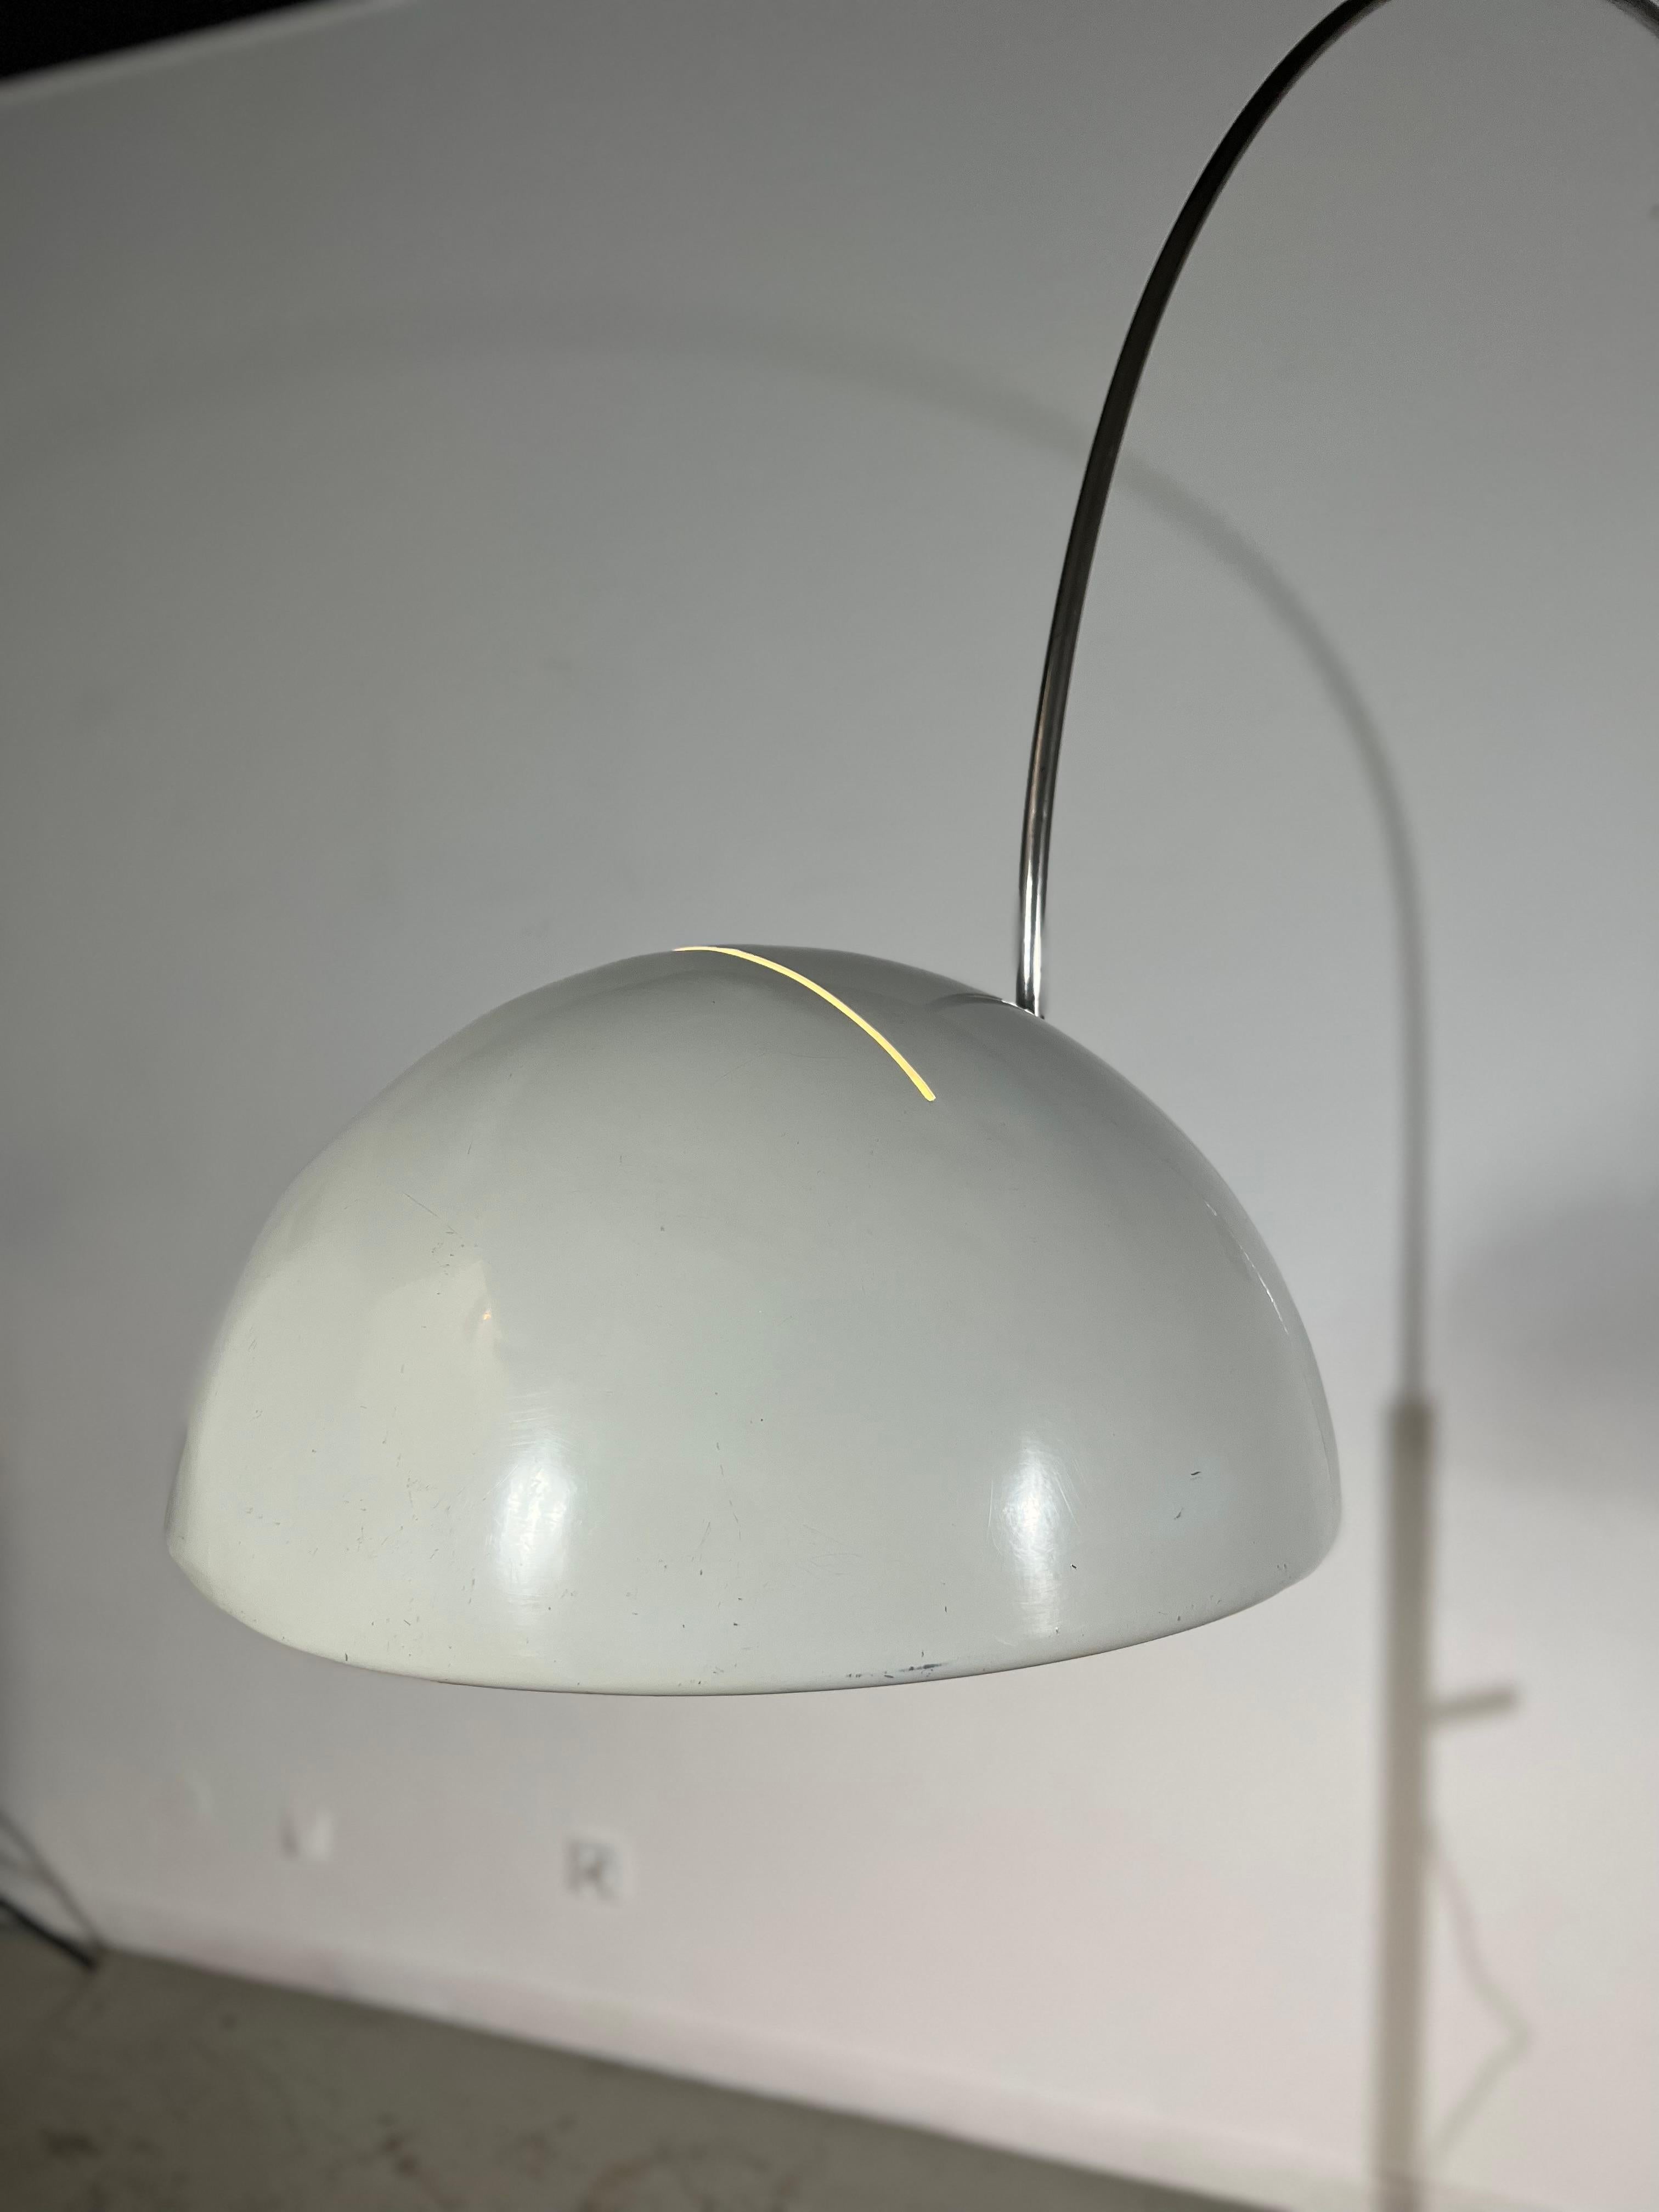 Coupe Floor Lamp by Joe Colombo for Oluce, 1960s For Sale 1